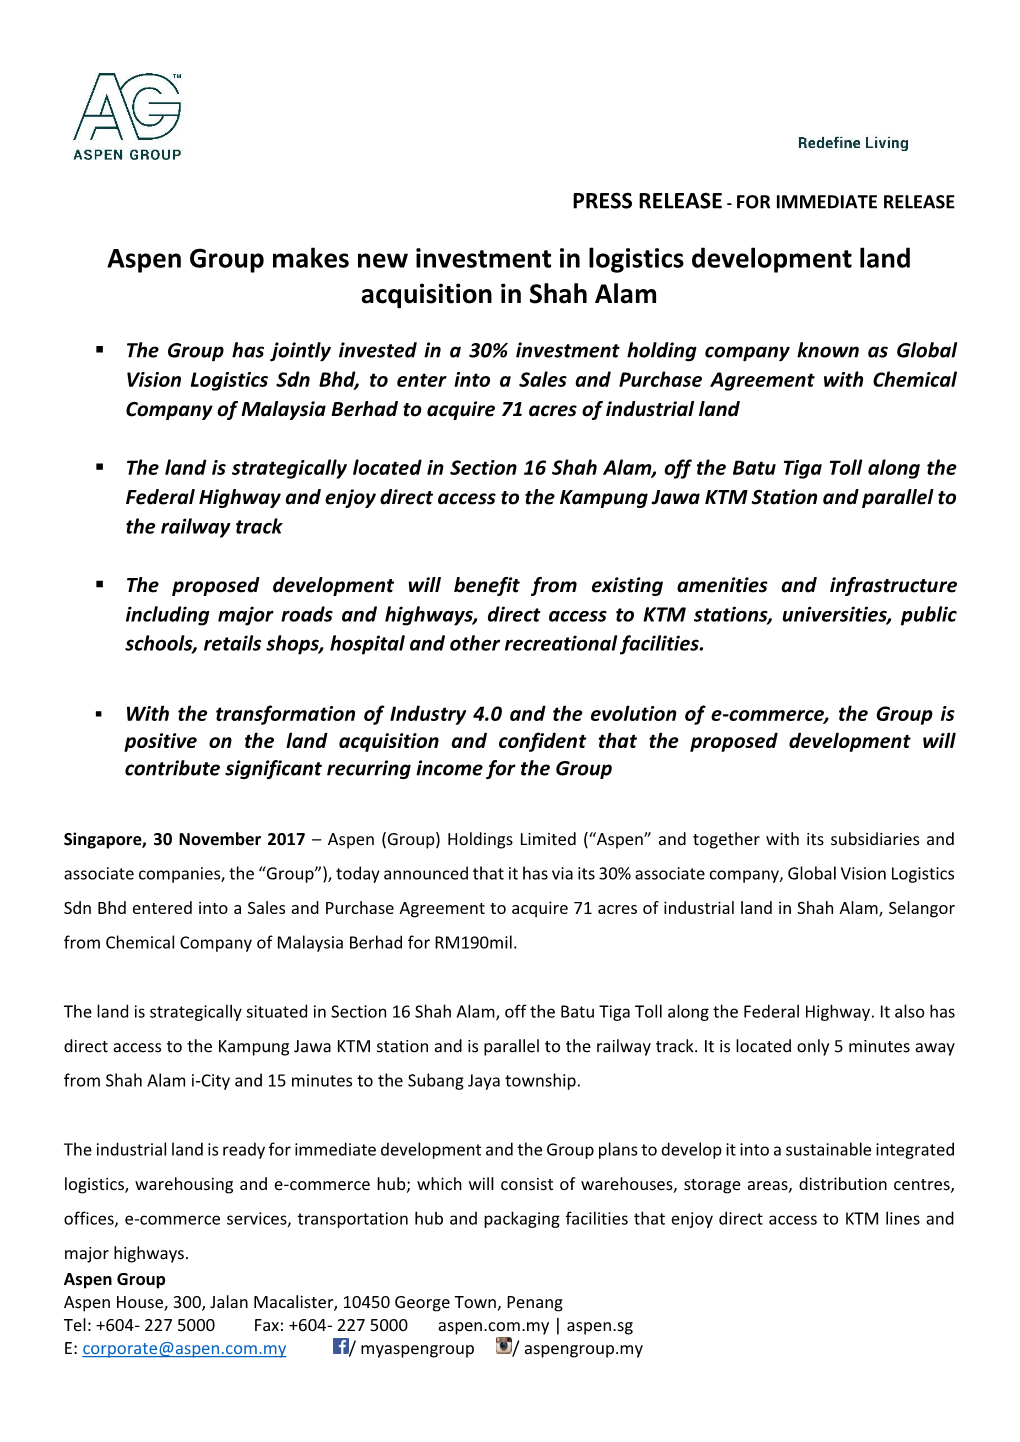 Aspen Group Makes New Investment in Logistics Development Land Acquisition in Shah Alam